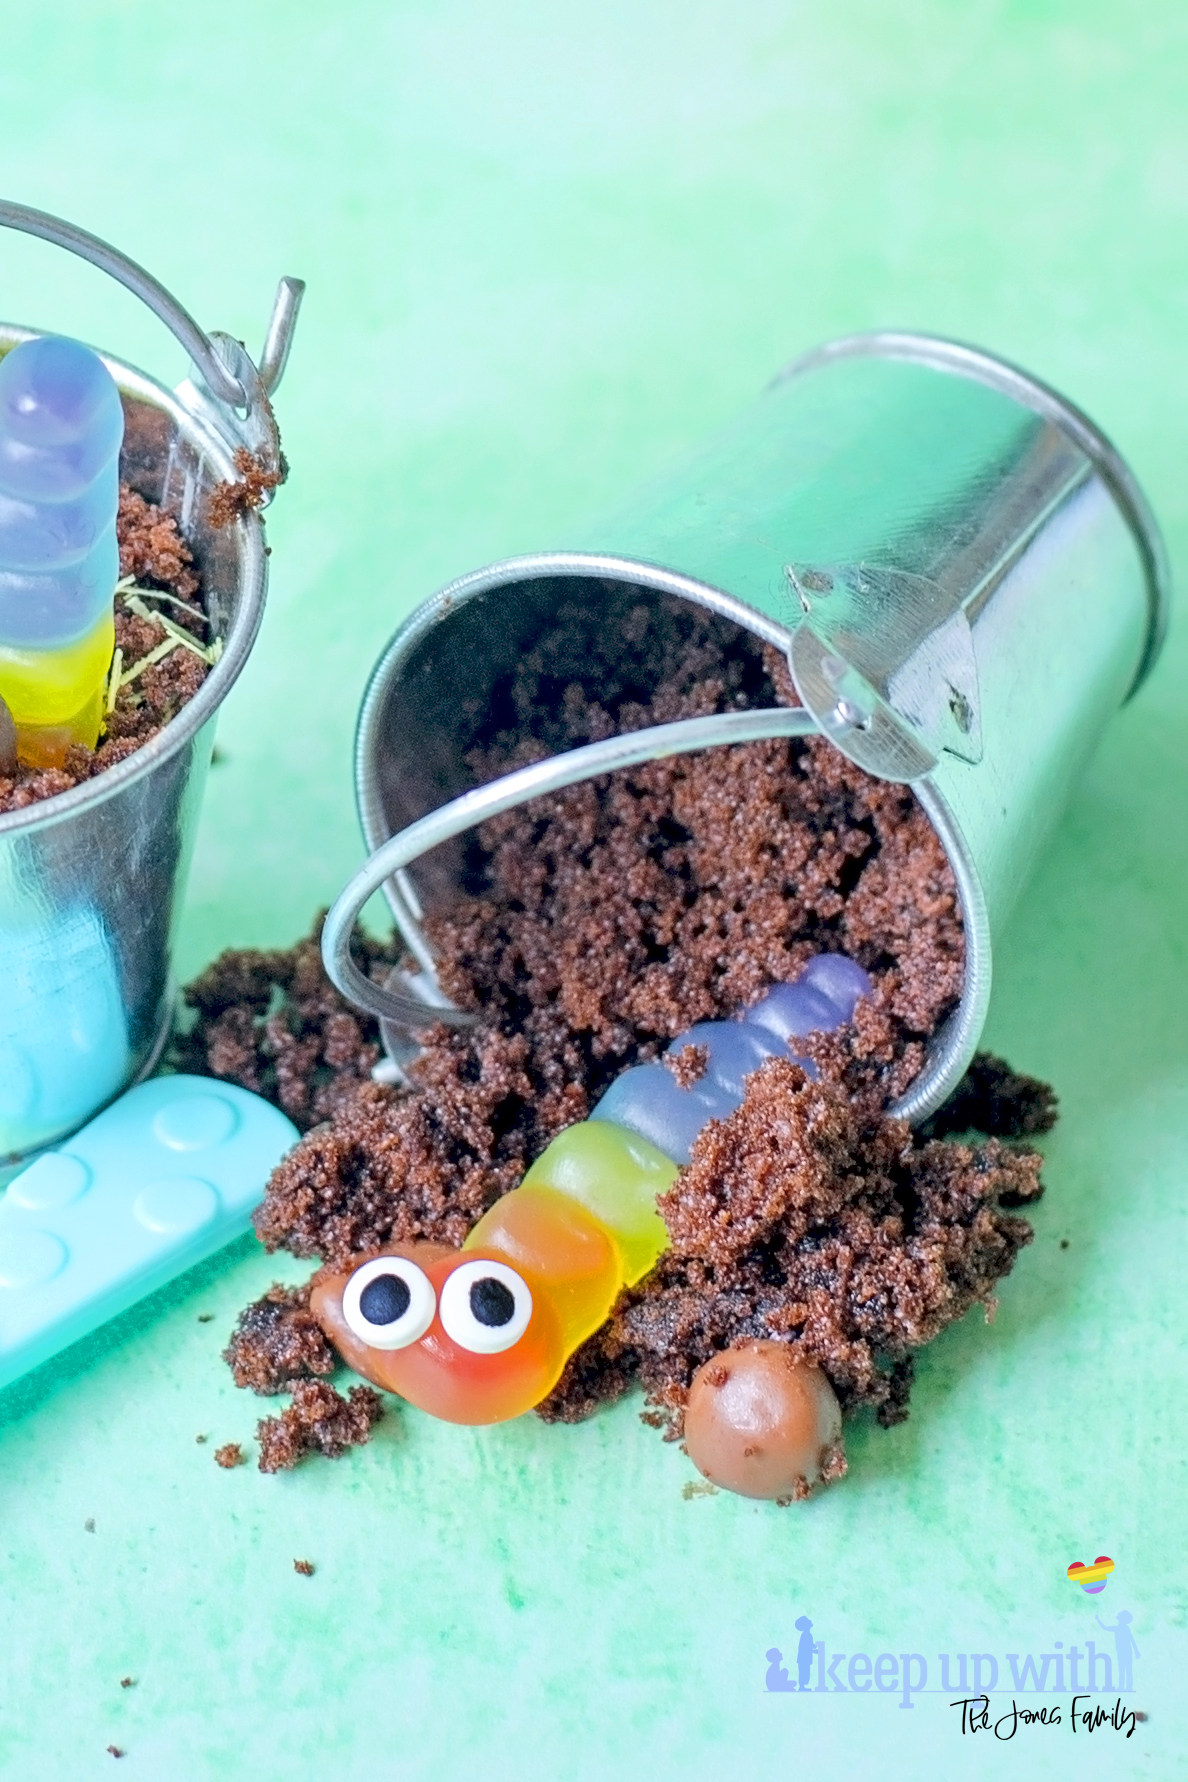 Image shows Buckets of Dirt 'n' Worms Dessert - two little galvanised steel buckets containing chocolate cake made to look like mud and gummy worms with little eyes in them. There are coloured plastic spoons for eating the desserts. Image by Sara-Jayne of Keep Up With The Jones Family.